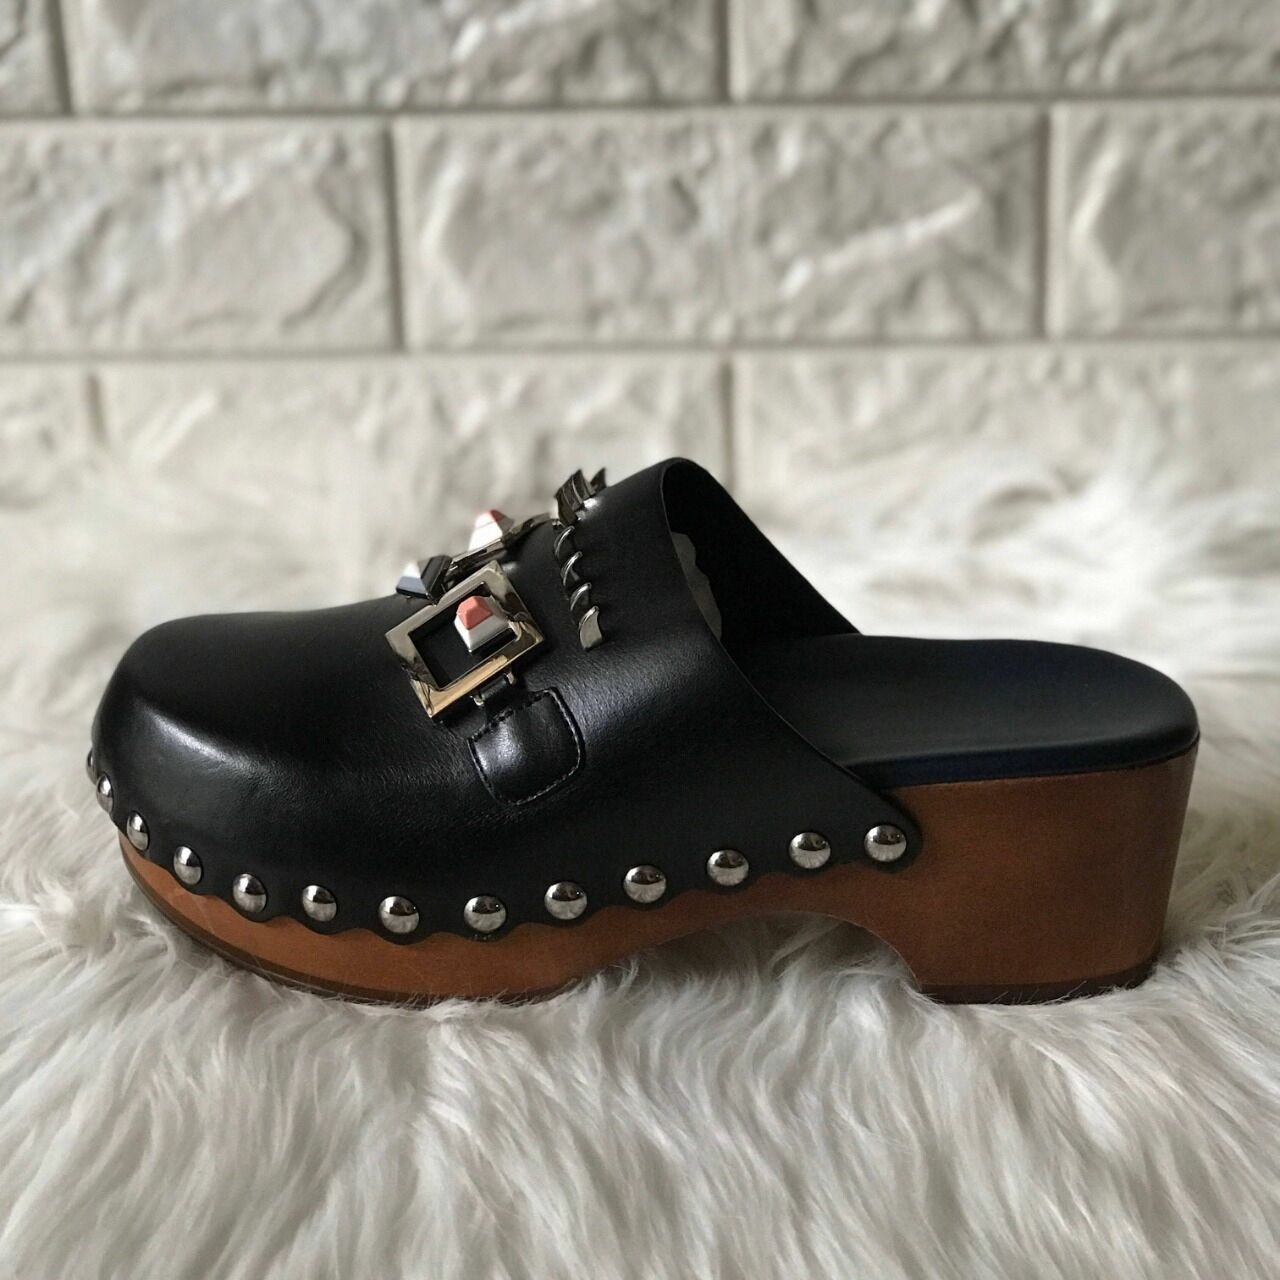 Fendi Black Leather Studded Accents Mules